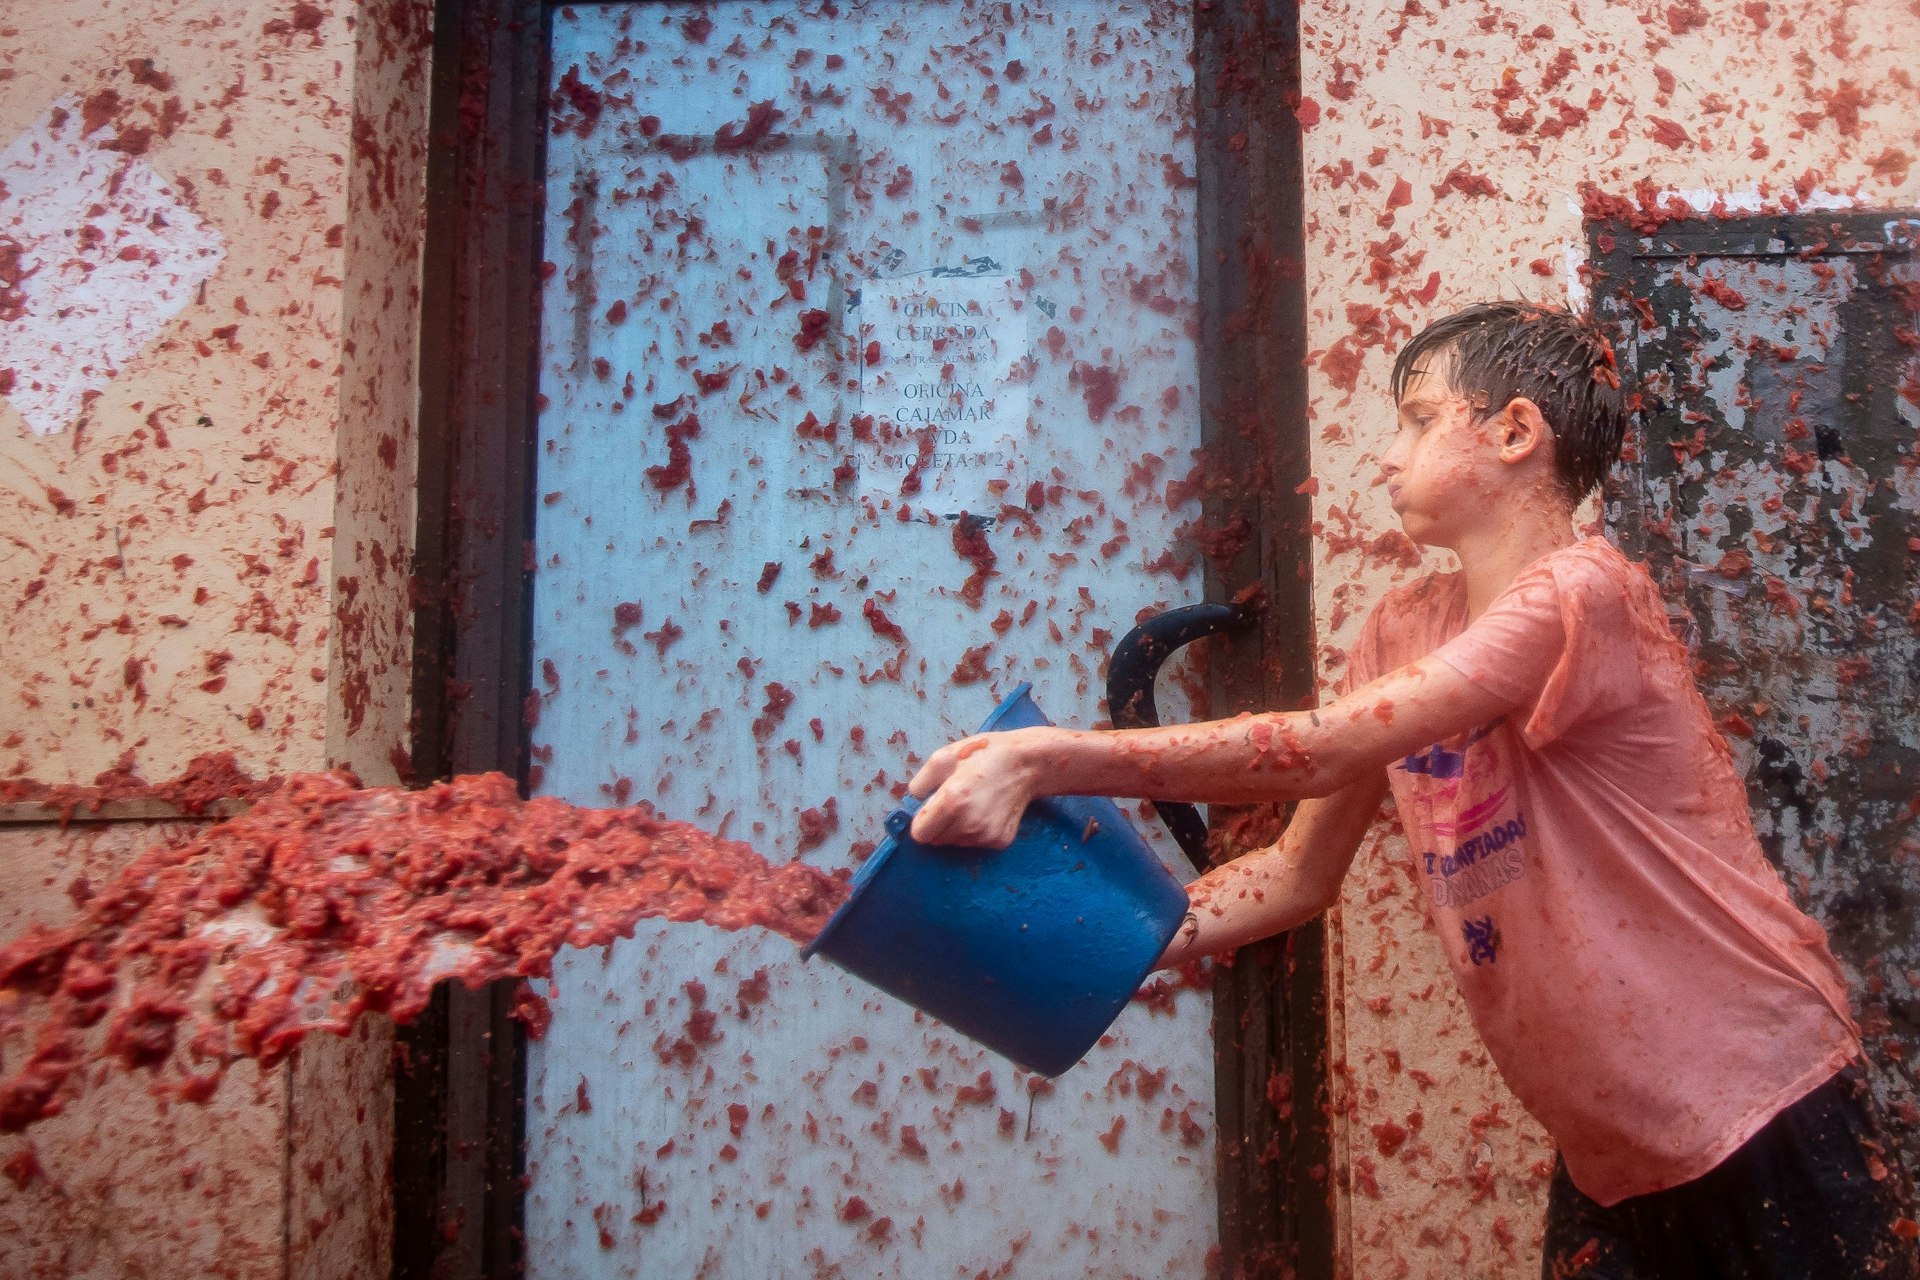 A boy used a bucket to hurl crushed tomatoes during La Tomatina tomato-throwing festival, Buñol, Spain